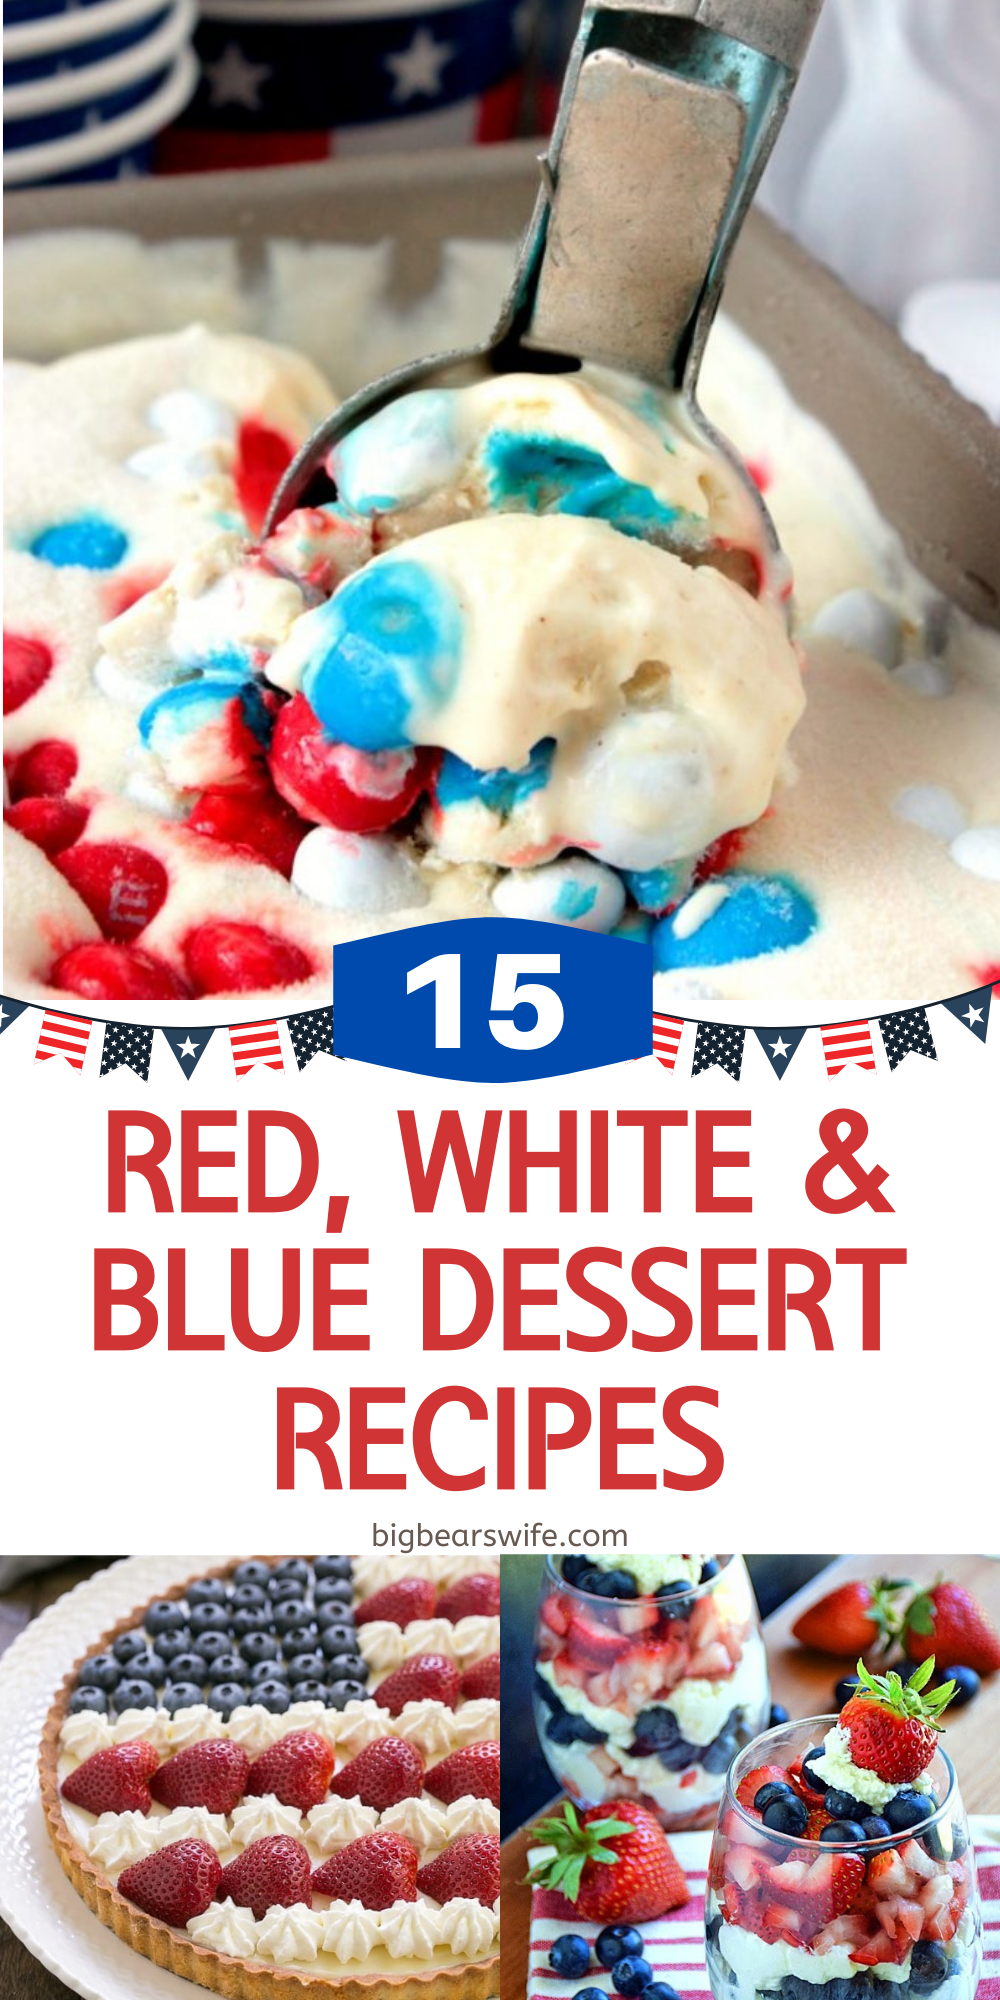 We love red, white and blue desserts for summer cookouts!! 
Here are 15 that you'll love!
Which one is your favorite? via @bigbearswife